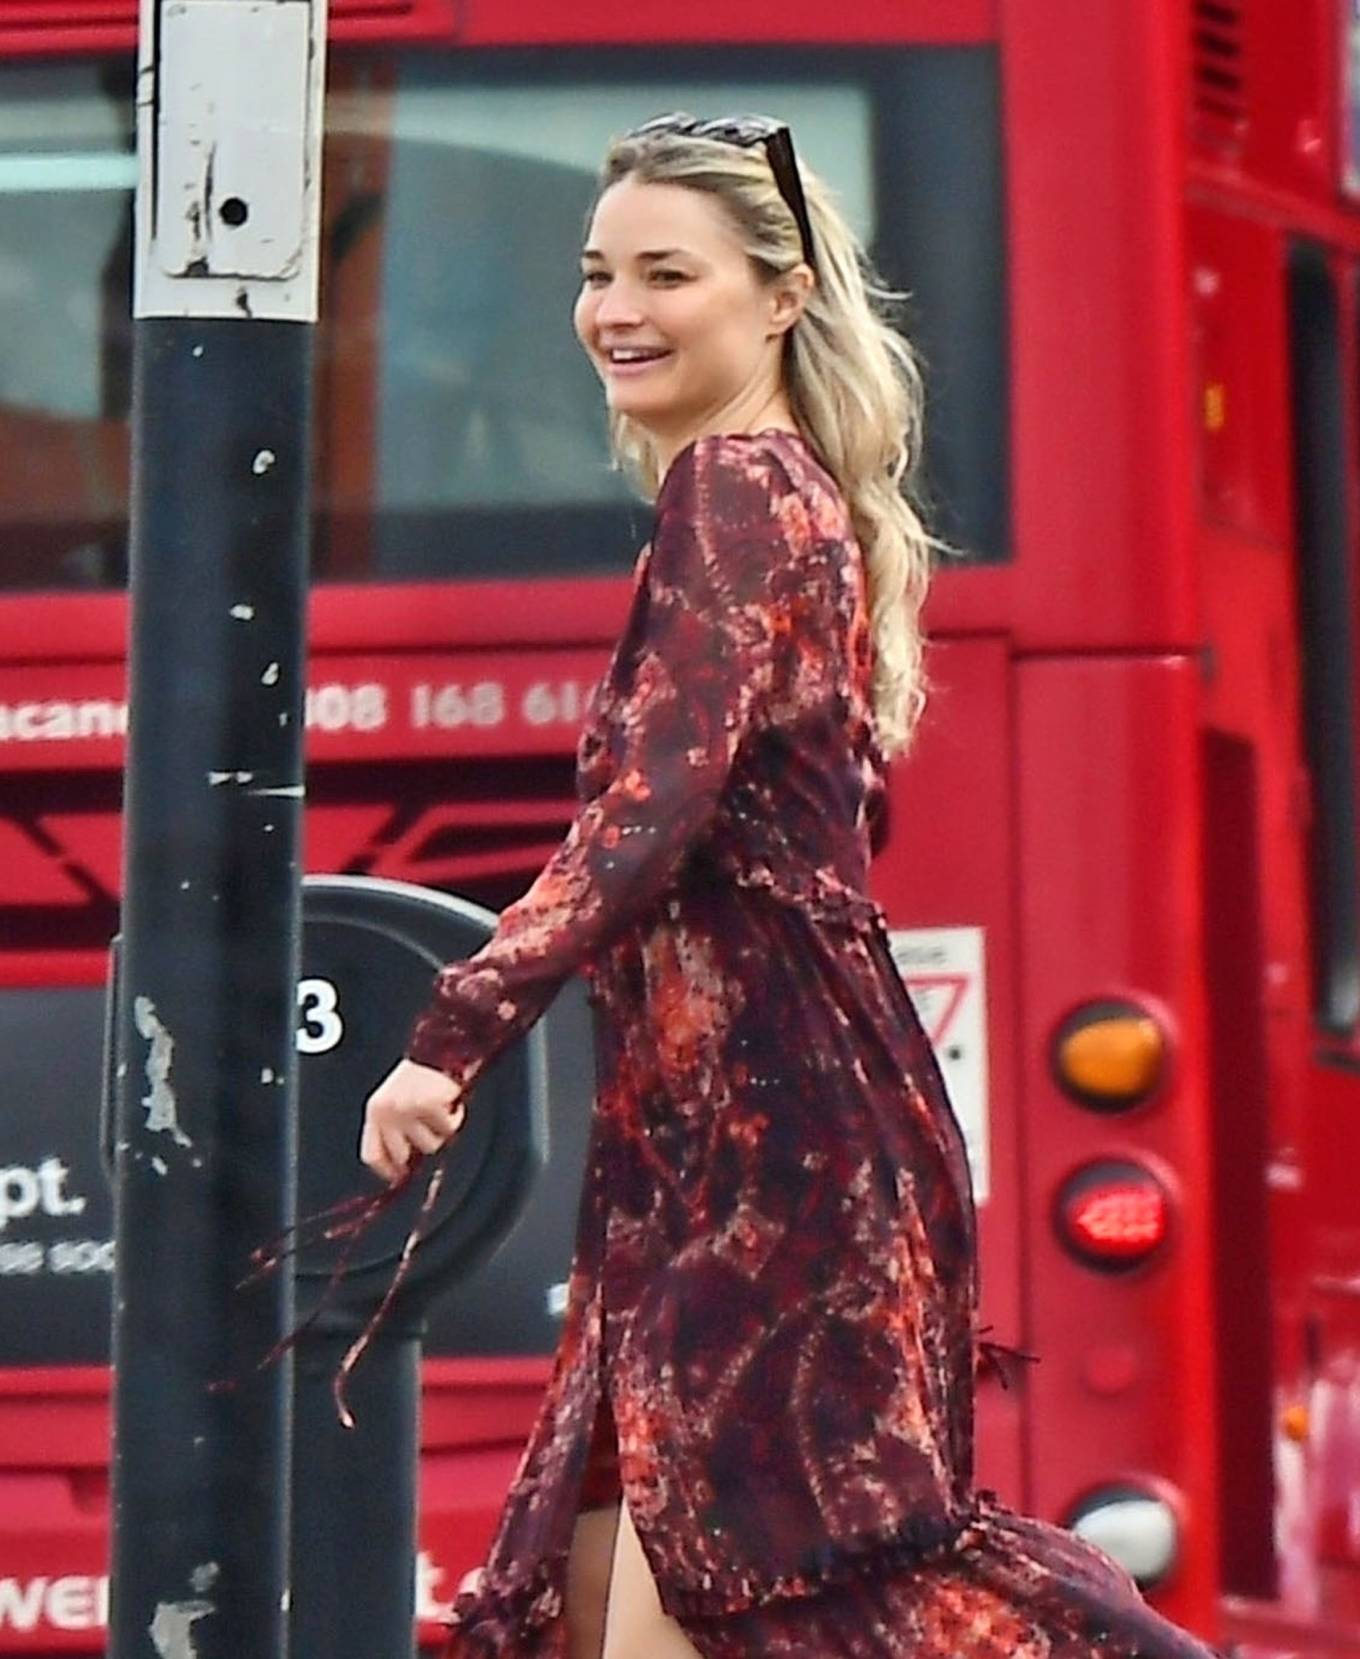 Emma Rigby walked the dog out in Notting Hill